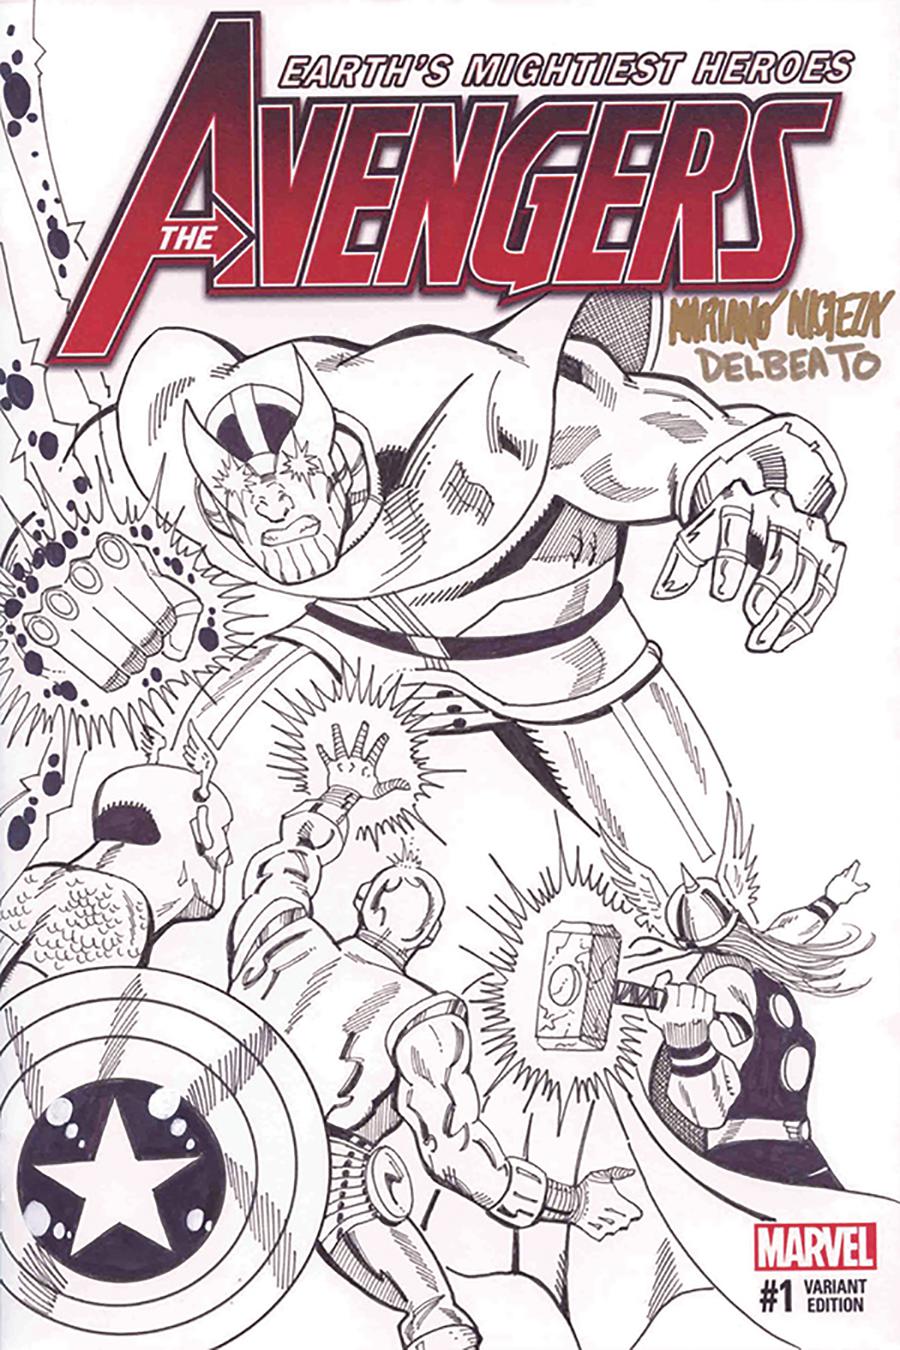 Avengers Infinity War DF Sketch Covers Signed & Remarked By Mariano Nicieza & Joe Delbeato